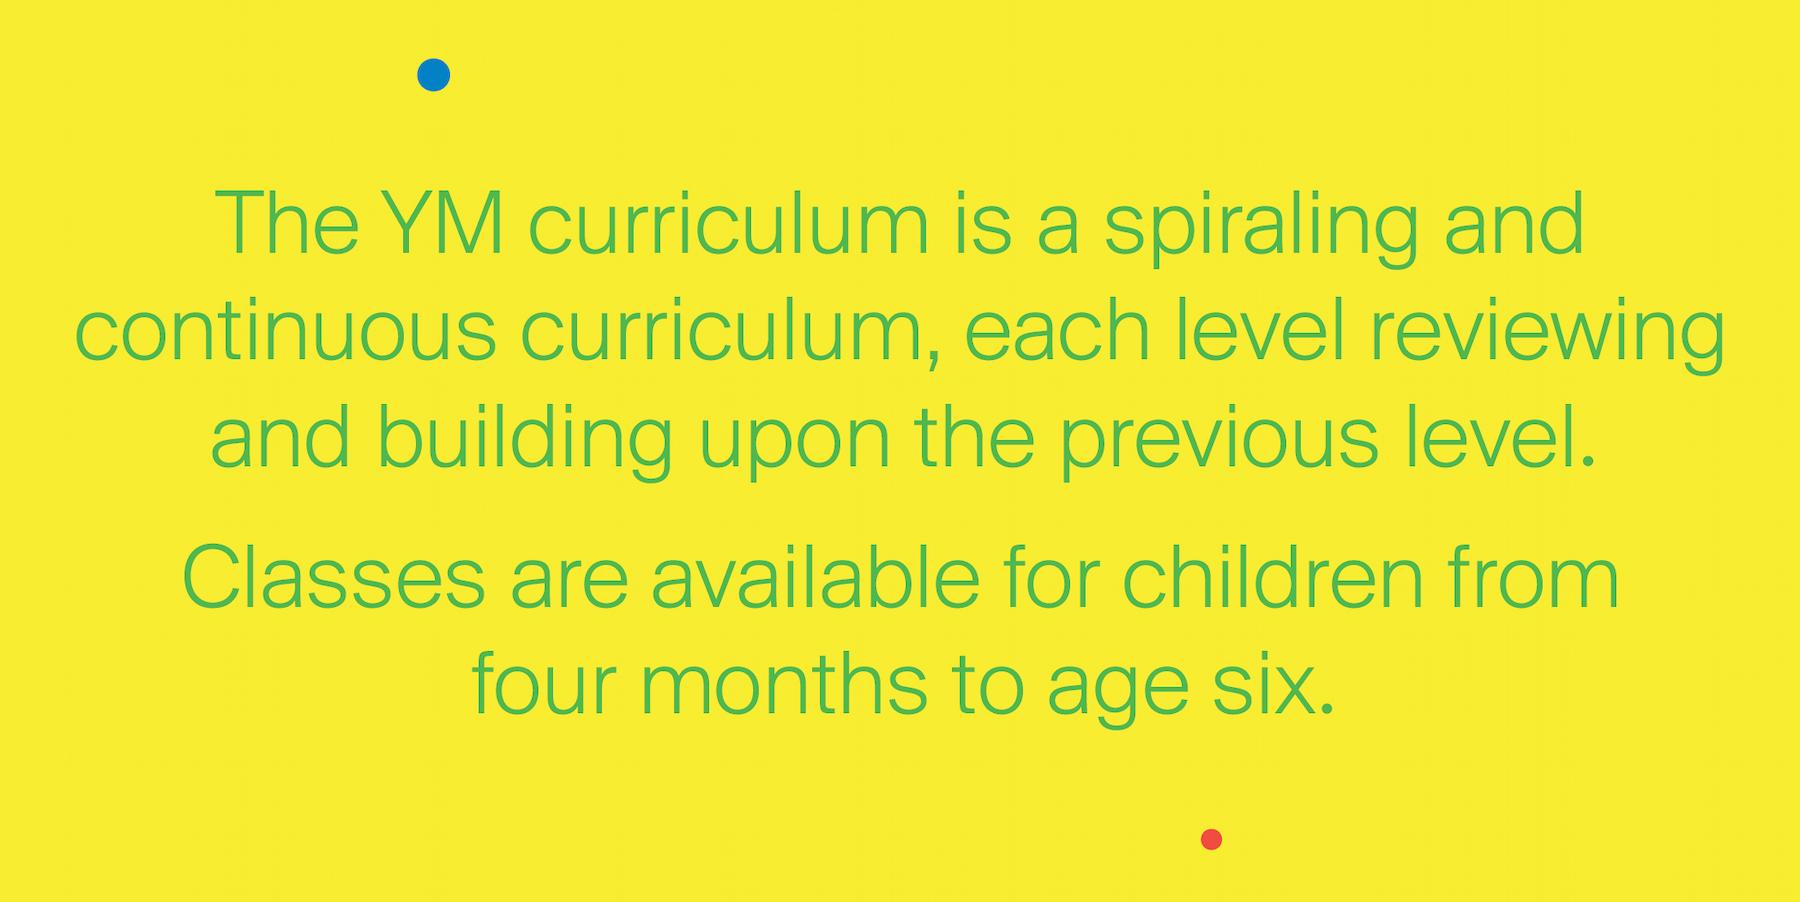 The YM curriculum is a spiraling and continuous curriculum, each level reviewing and building upon the previous level. Classes are available for children from four months to age six.